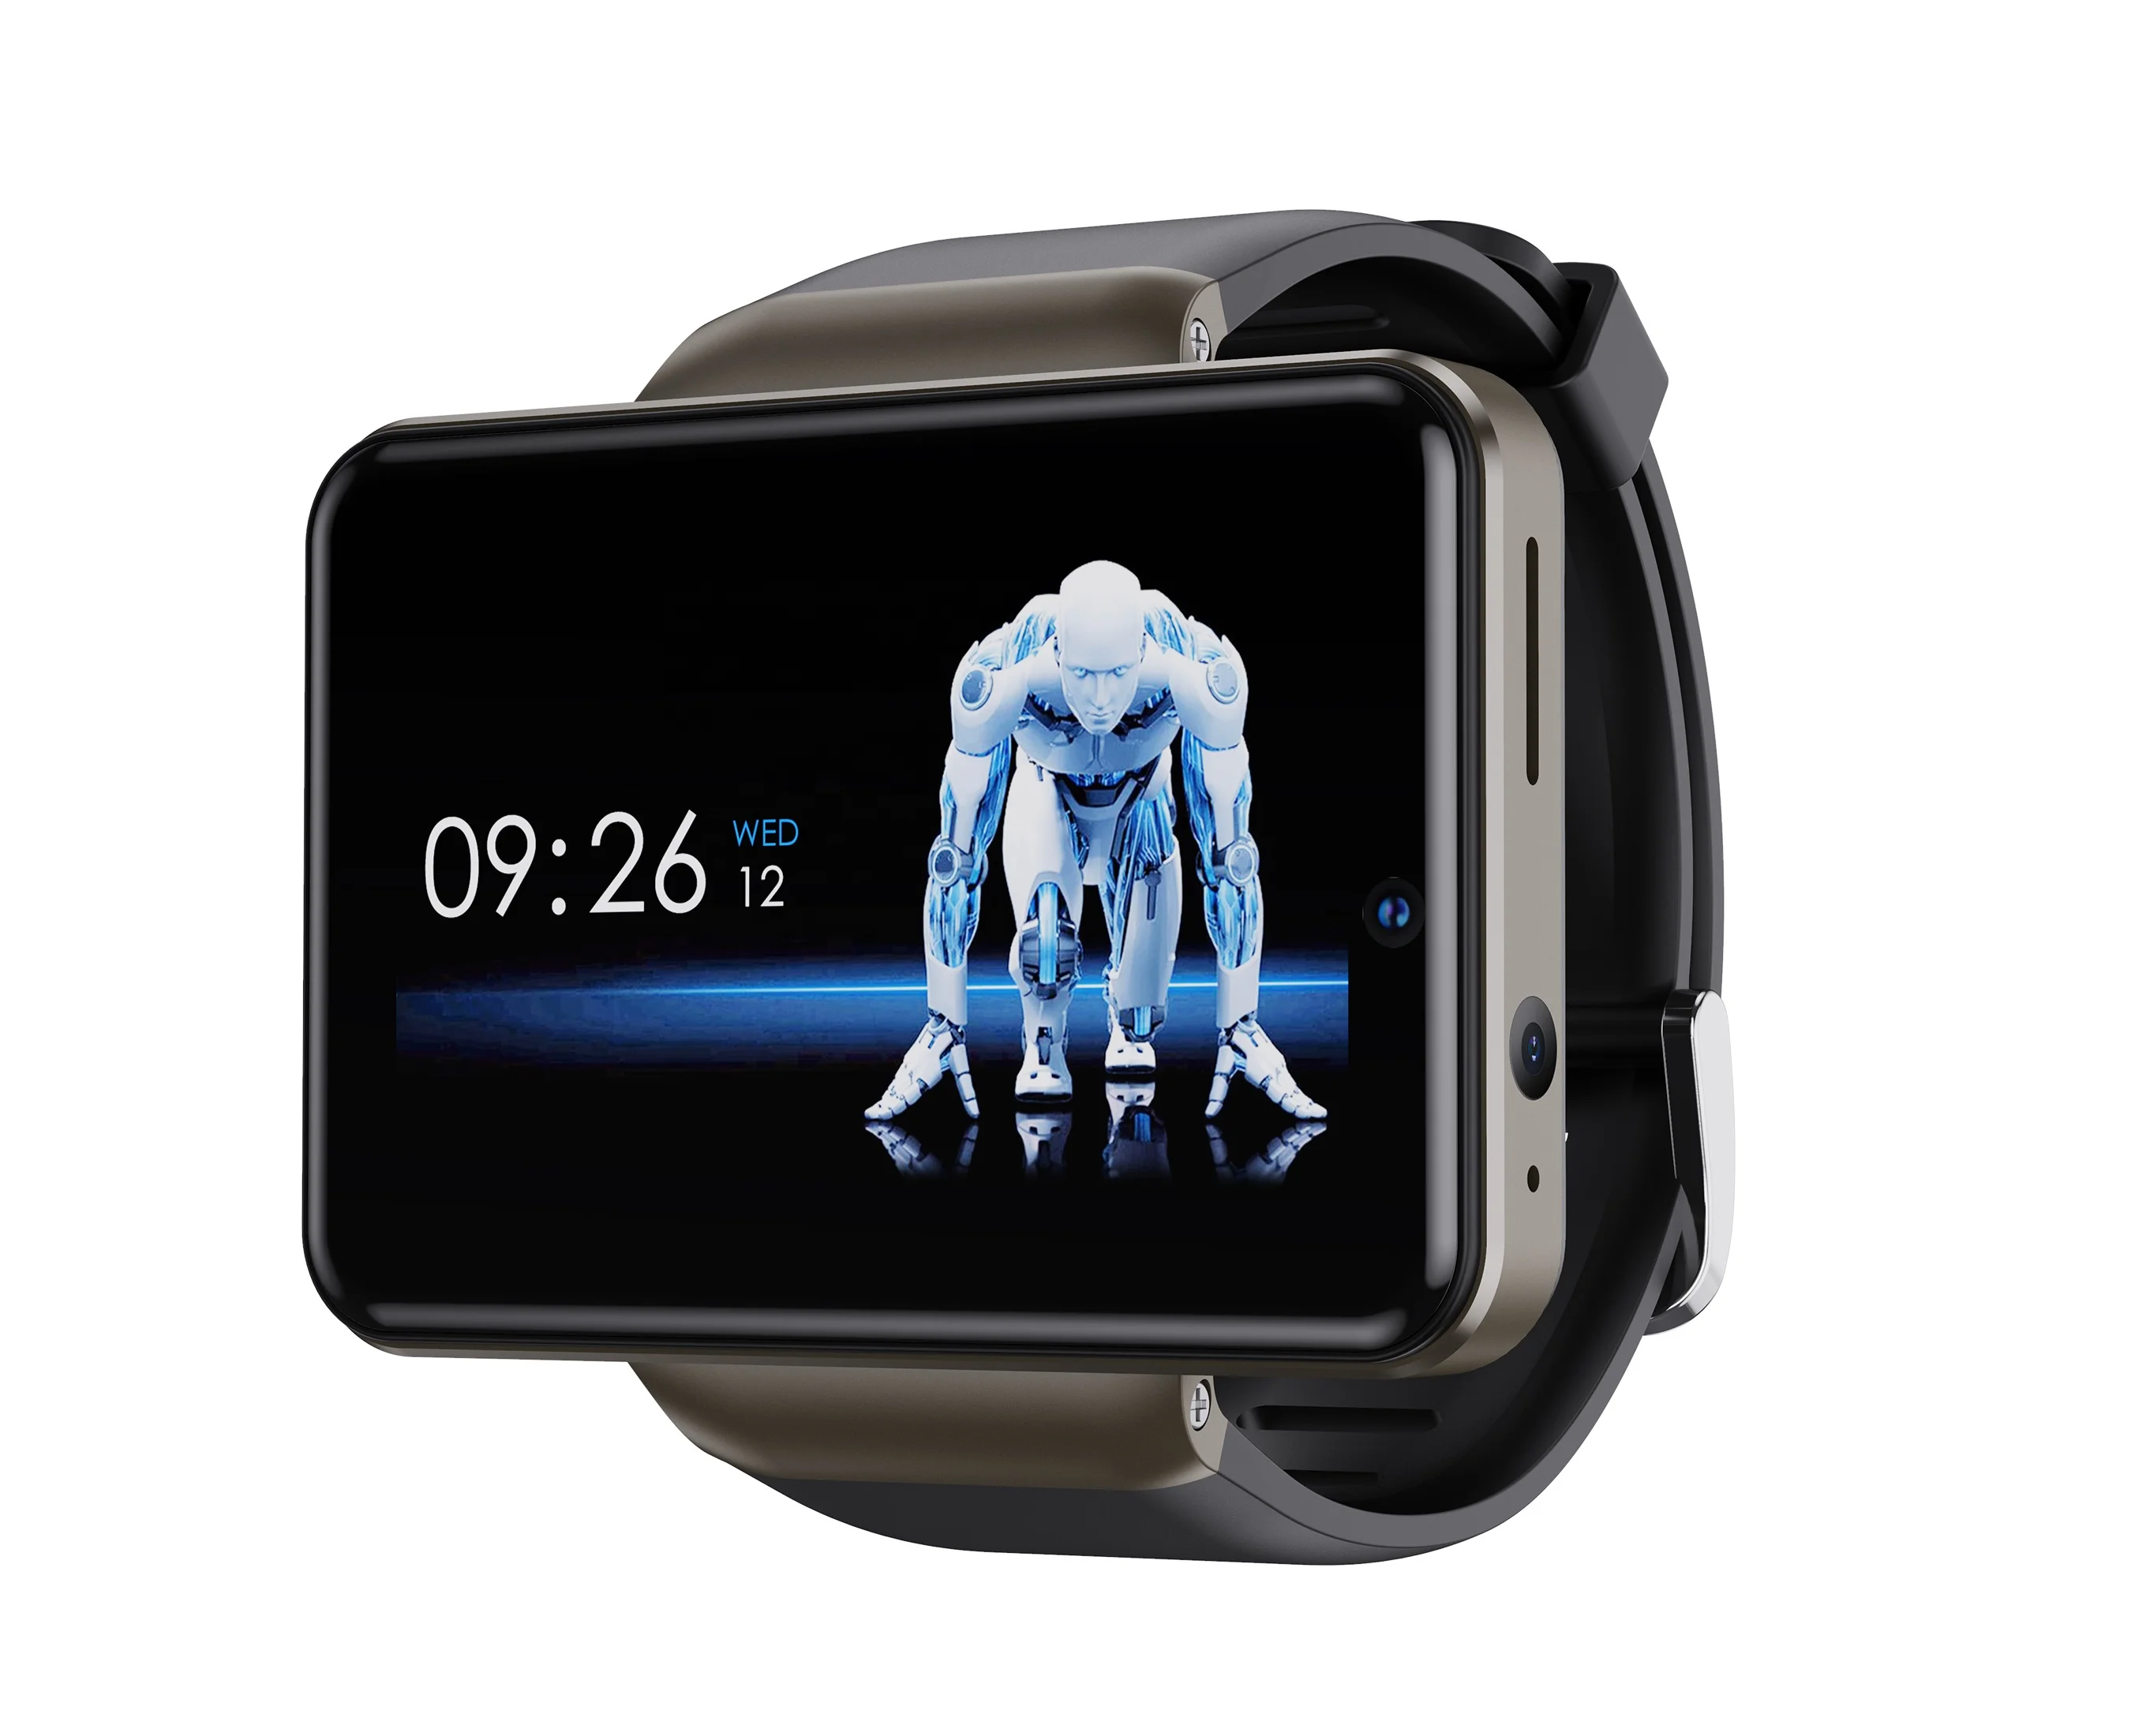 

2021 New DM101 4G Smart Watch Mobile Phone Android 7.1 Quad Core 3GB 32GB Heart Rate Pedometer IP67 Waterproof 2.4'' Smartwatch